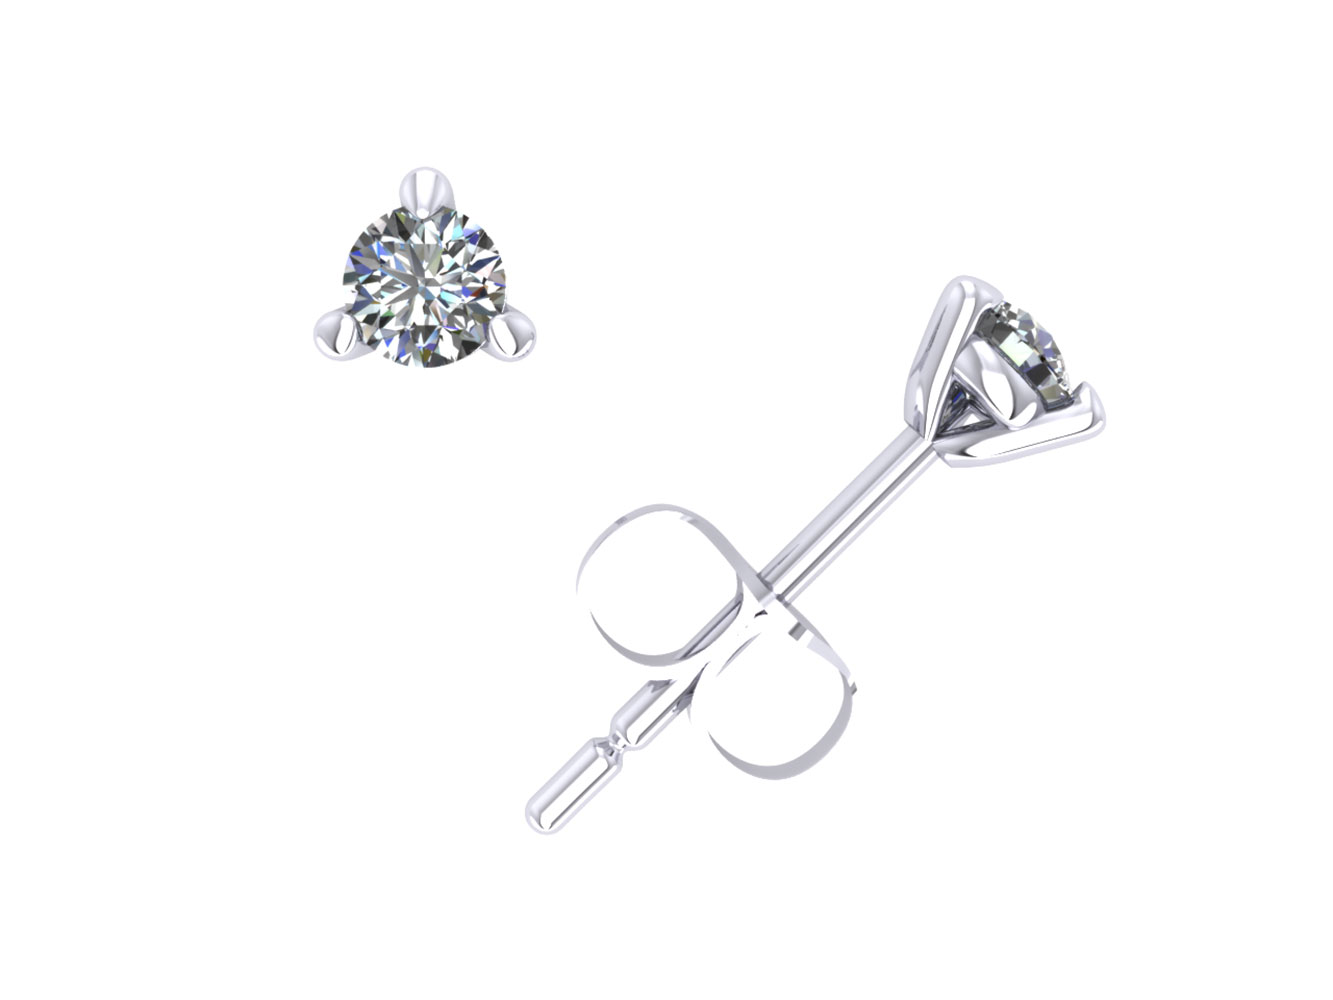 Jewel We Sell 0.15Ct Round Diamond Martini Stud Earrings 14k White or Yellow Gold 3Prong Setting G SI1